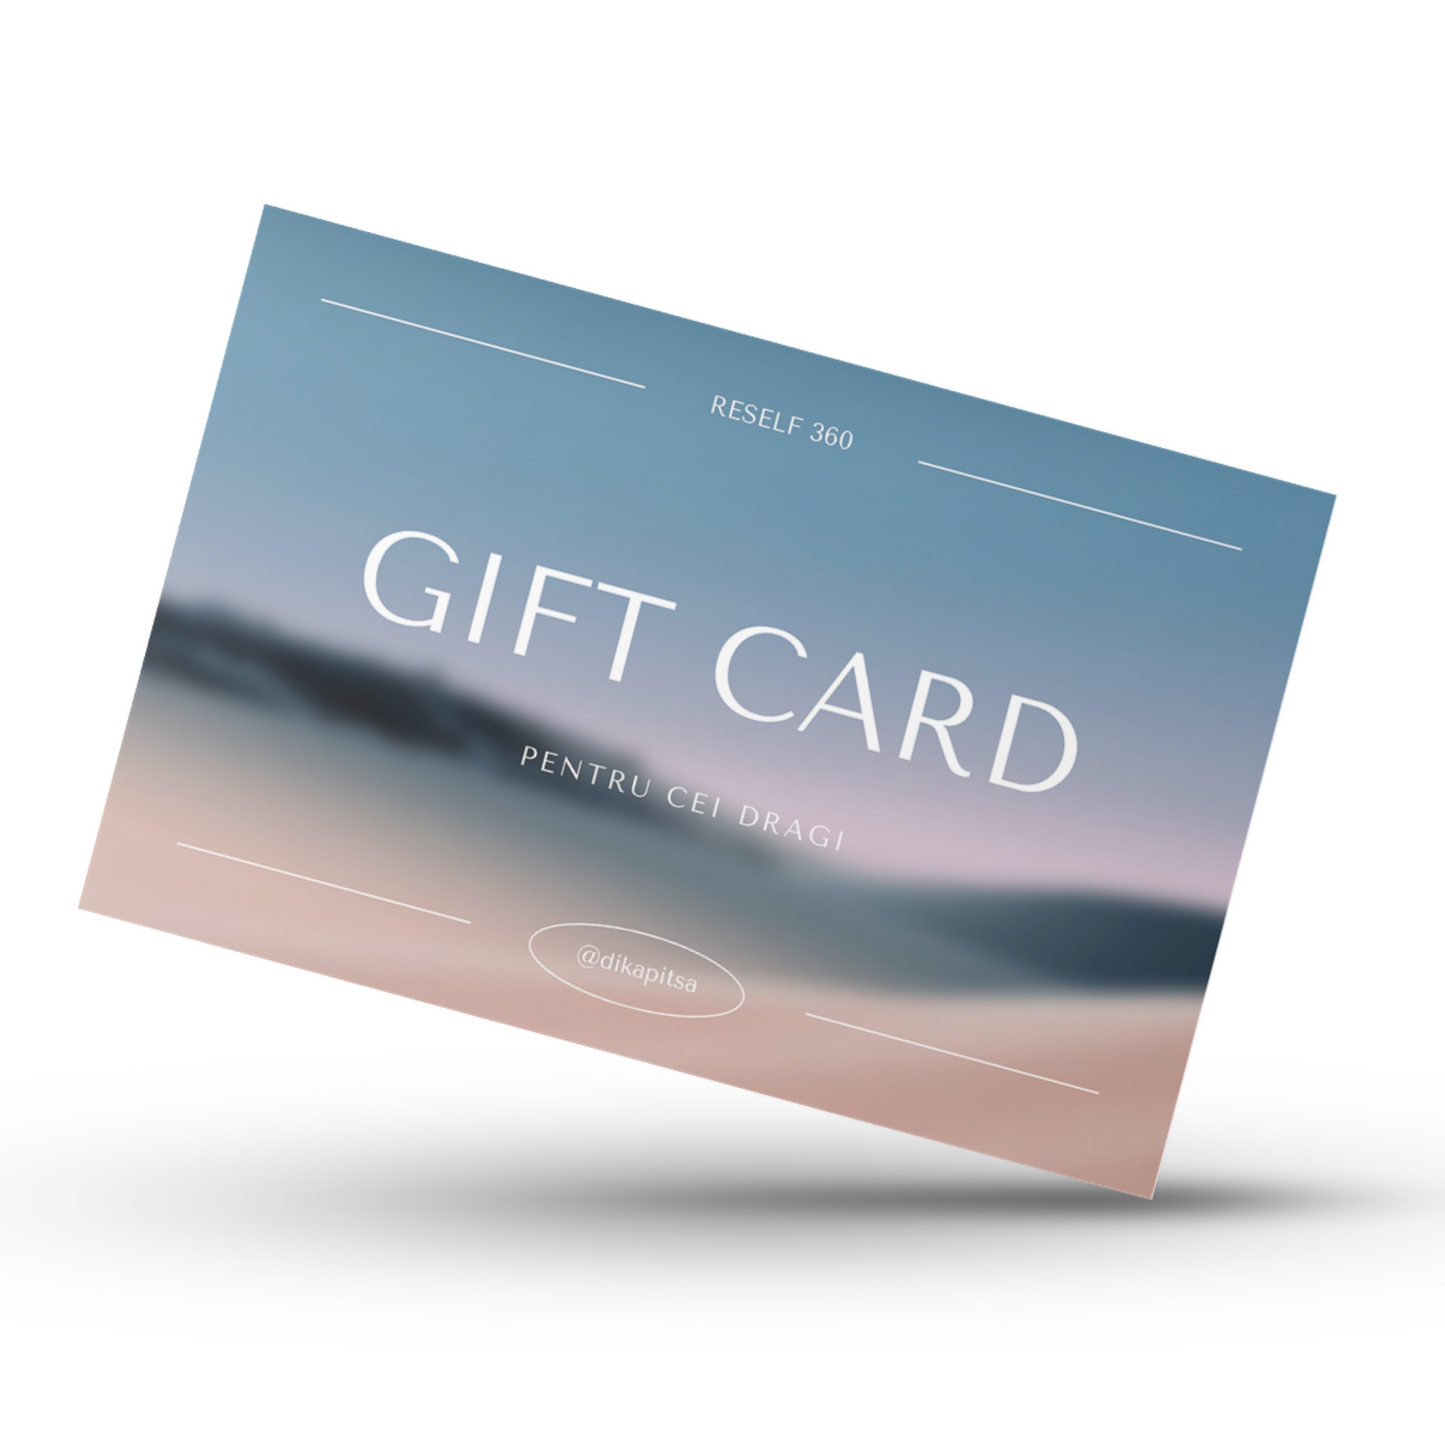 Gift Card RESELF 360